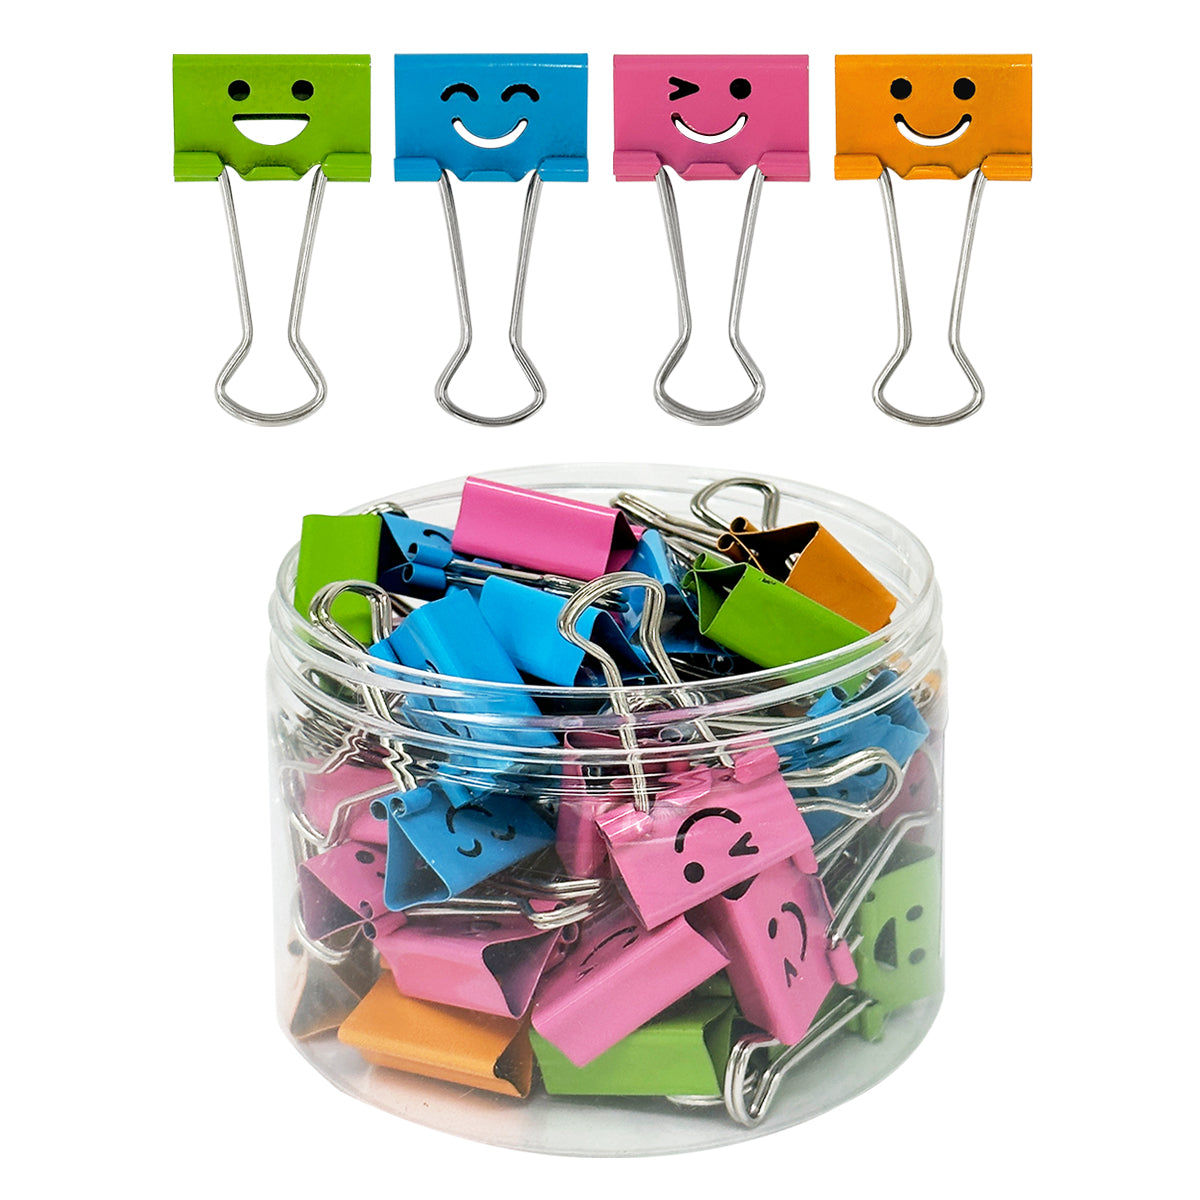 Wrapables Smiley Face Binder Clips for Office, Paper Clamps, Paper Clips